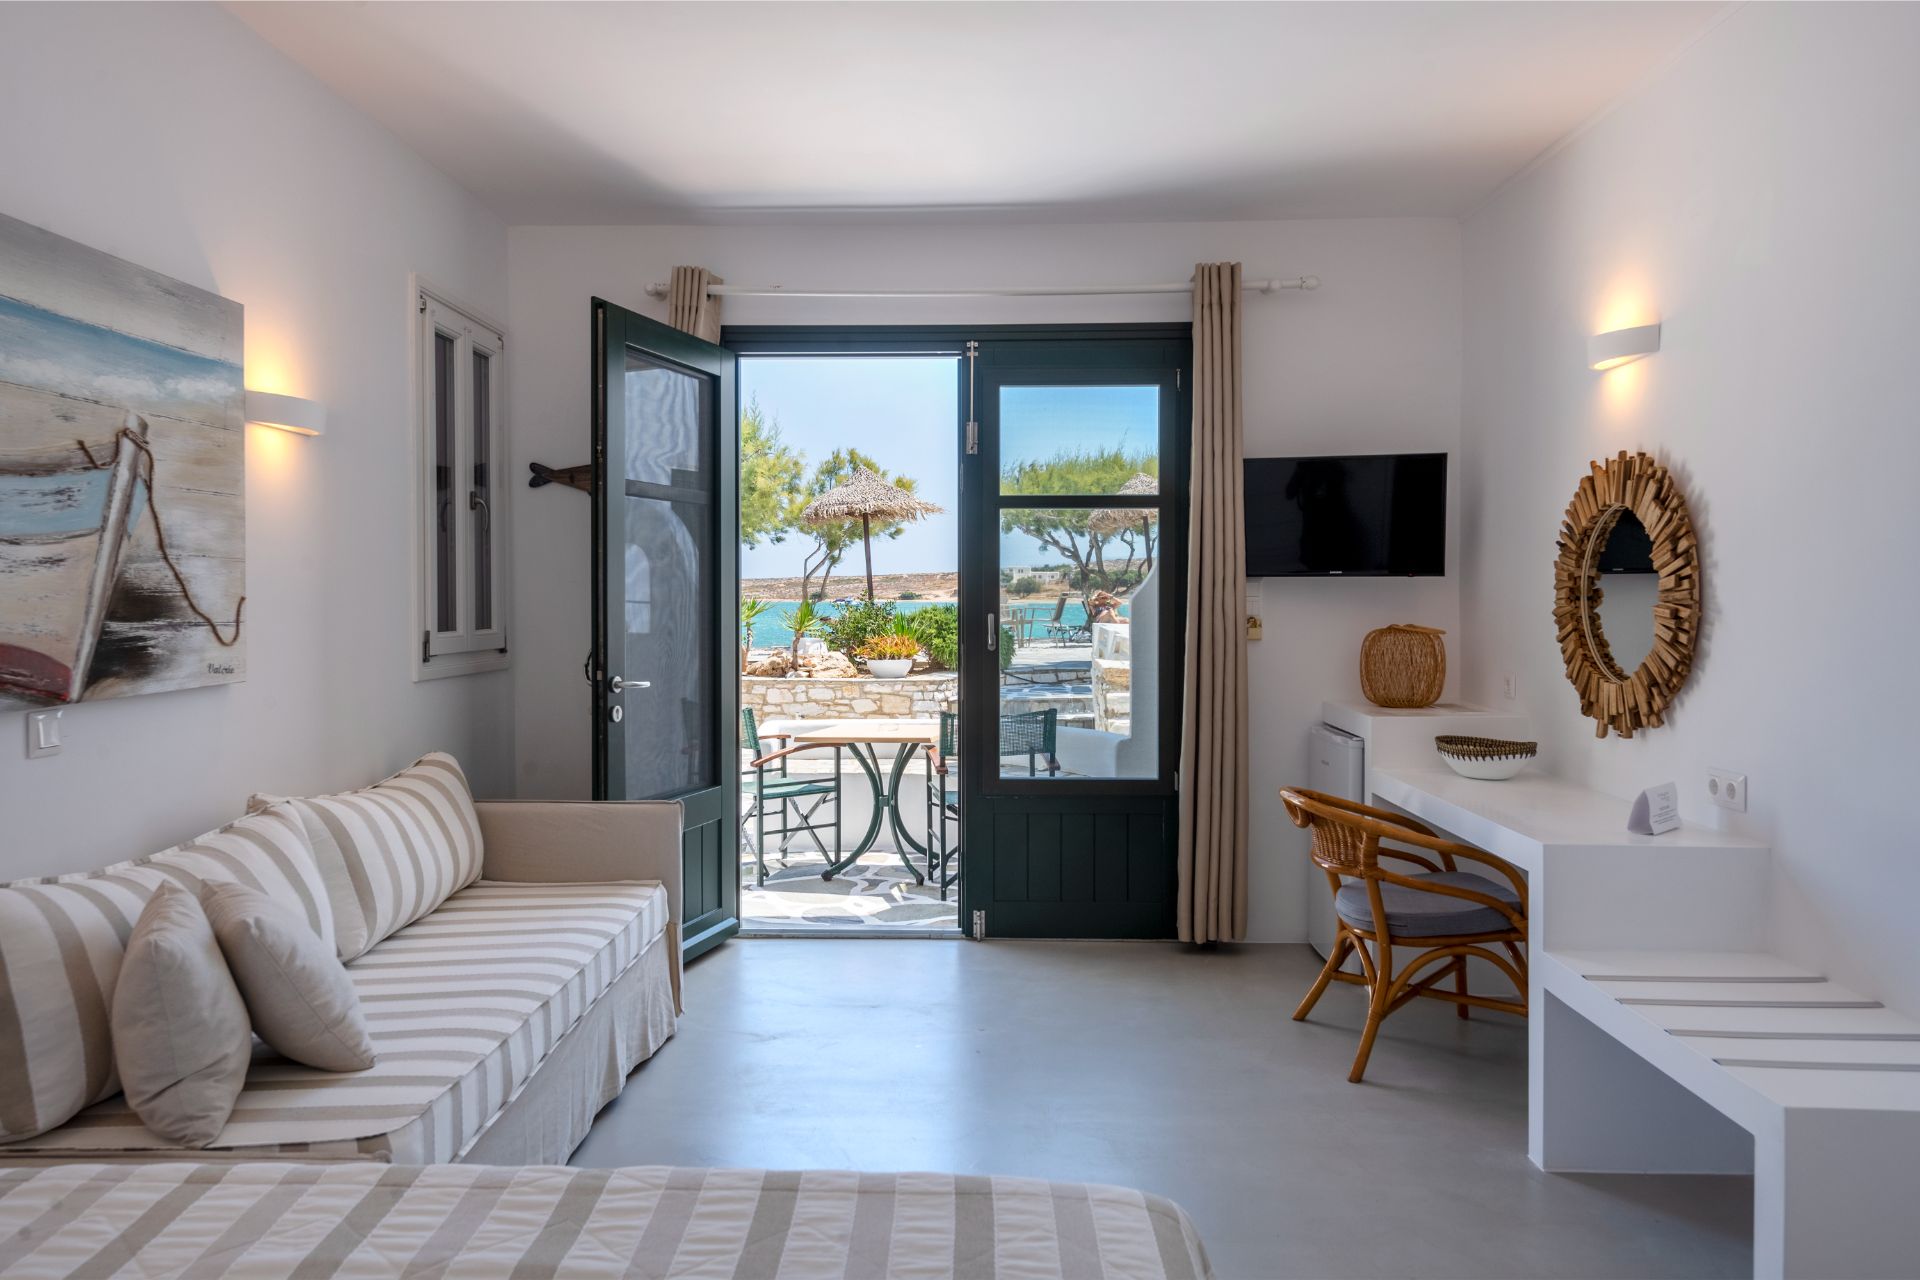 Kalypso Hotel Paros – Deluxe Room up to 4 guests (4)